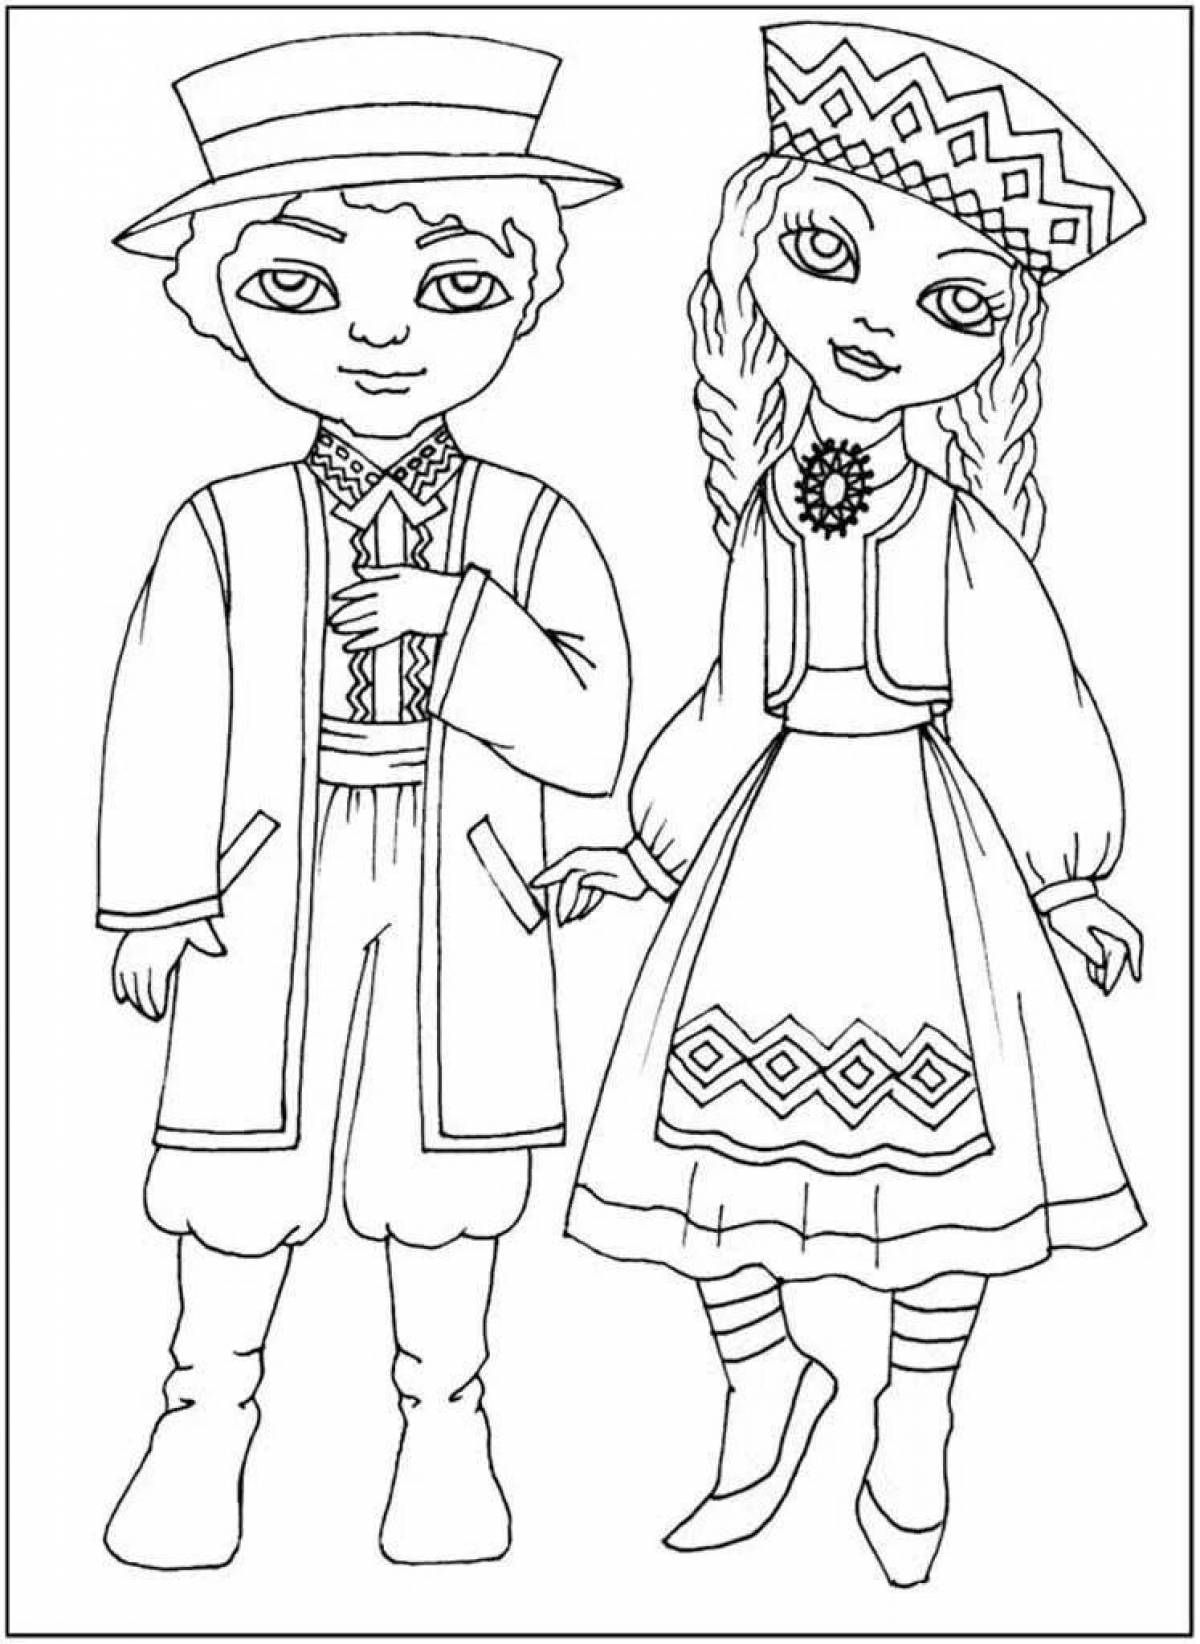 Coloring page luxurious belarusian costume